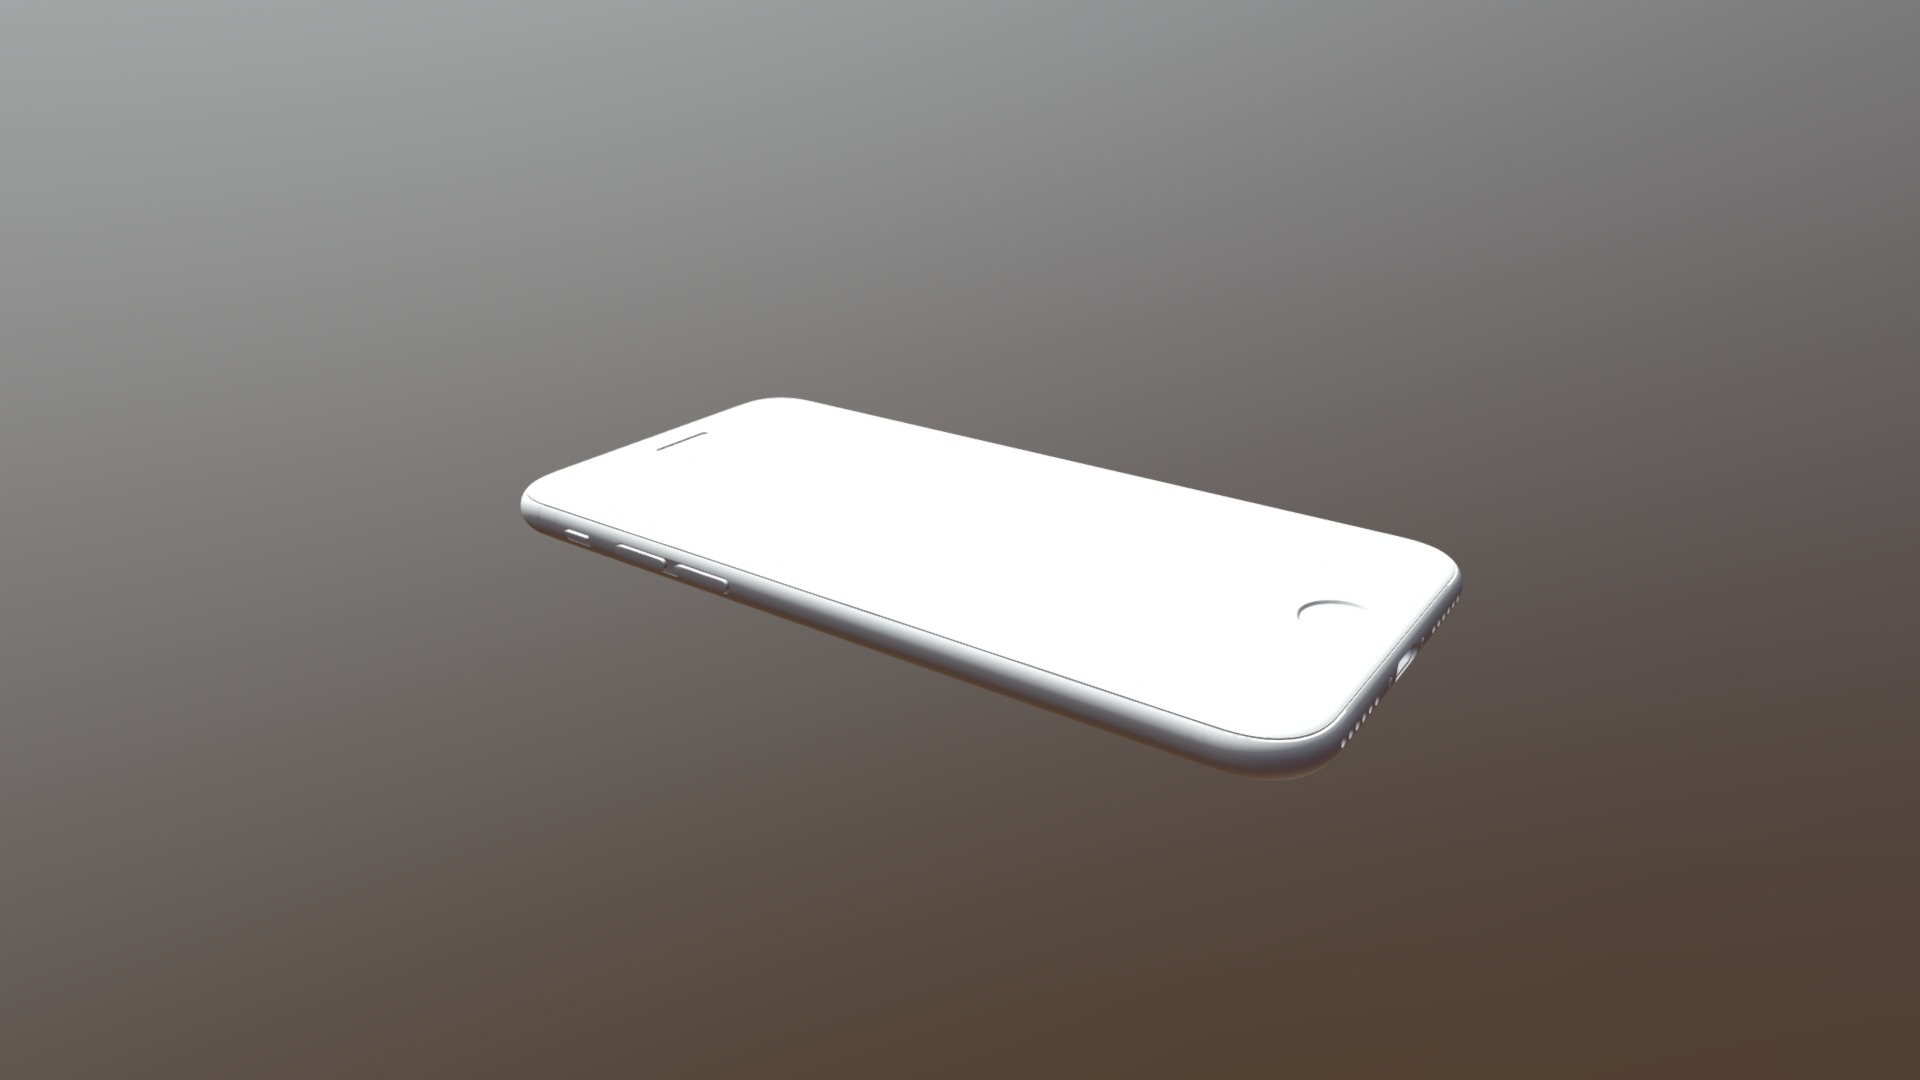 3D model iPhone 7 – original Apple dimensions - This is a 3D model of the iPhone 7 - original Apple dimensions. The 3D model is about a white cell phone.